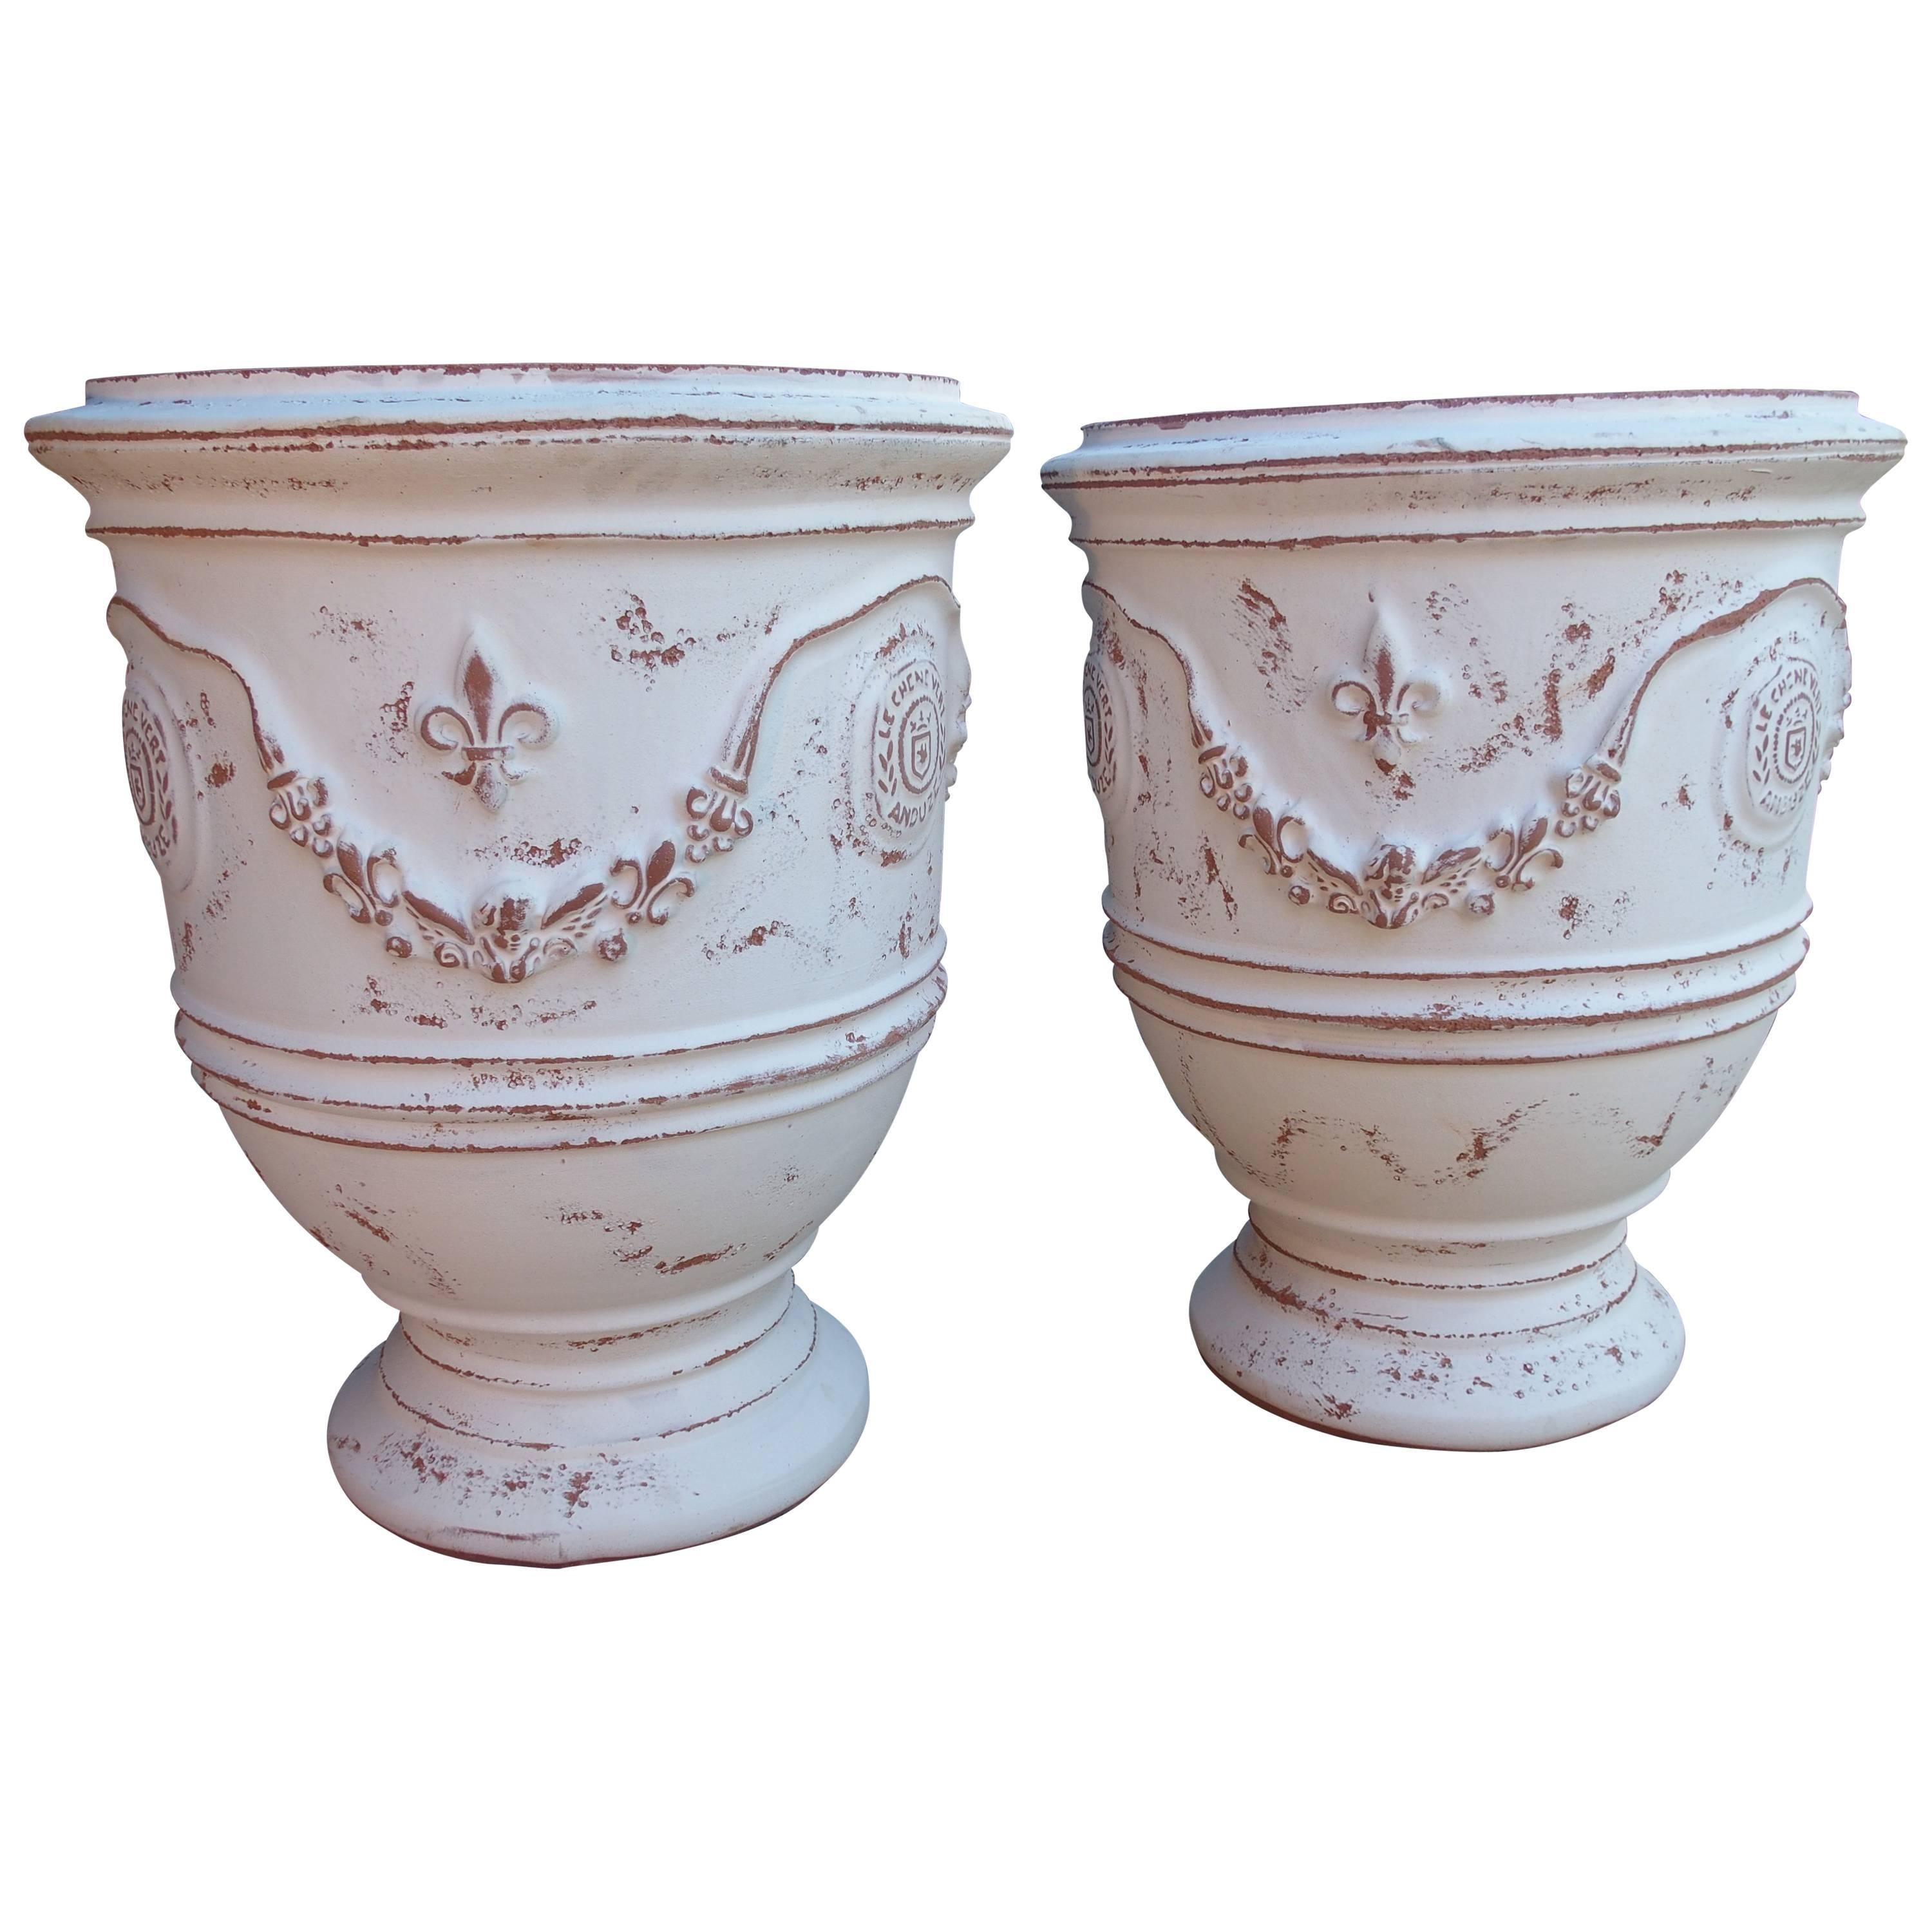 Pair of White Painted and Distressed Anduze Pots, France